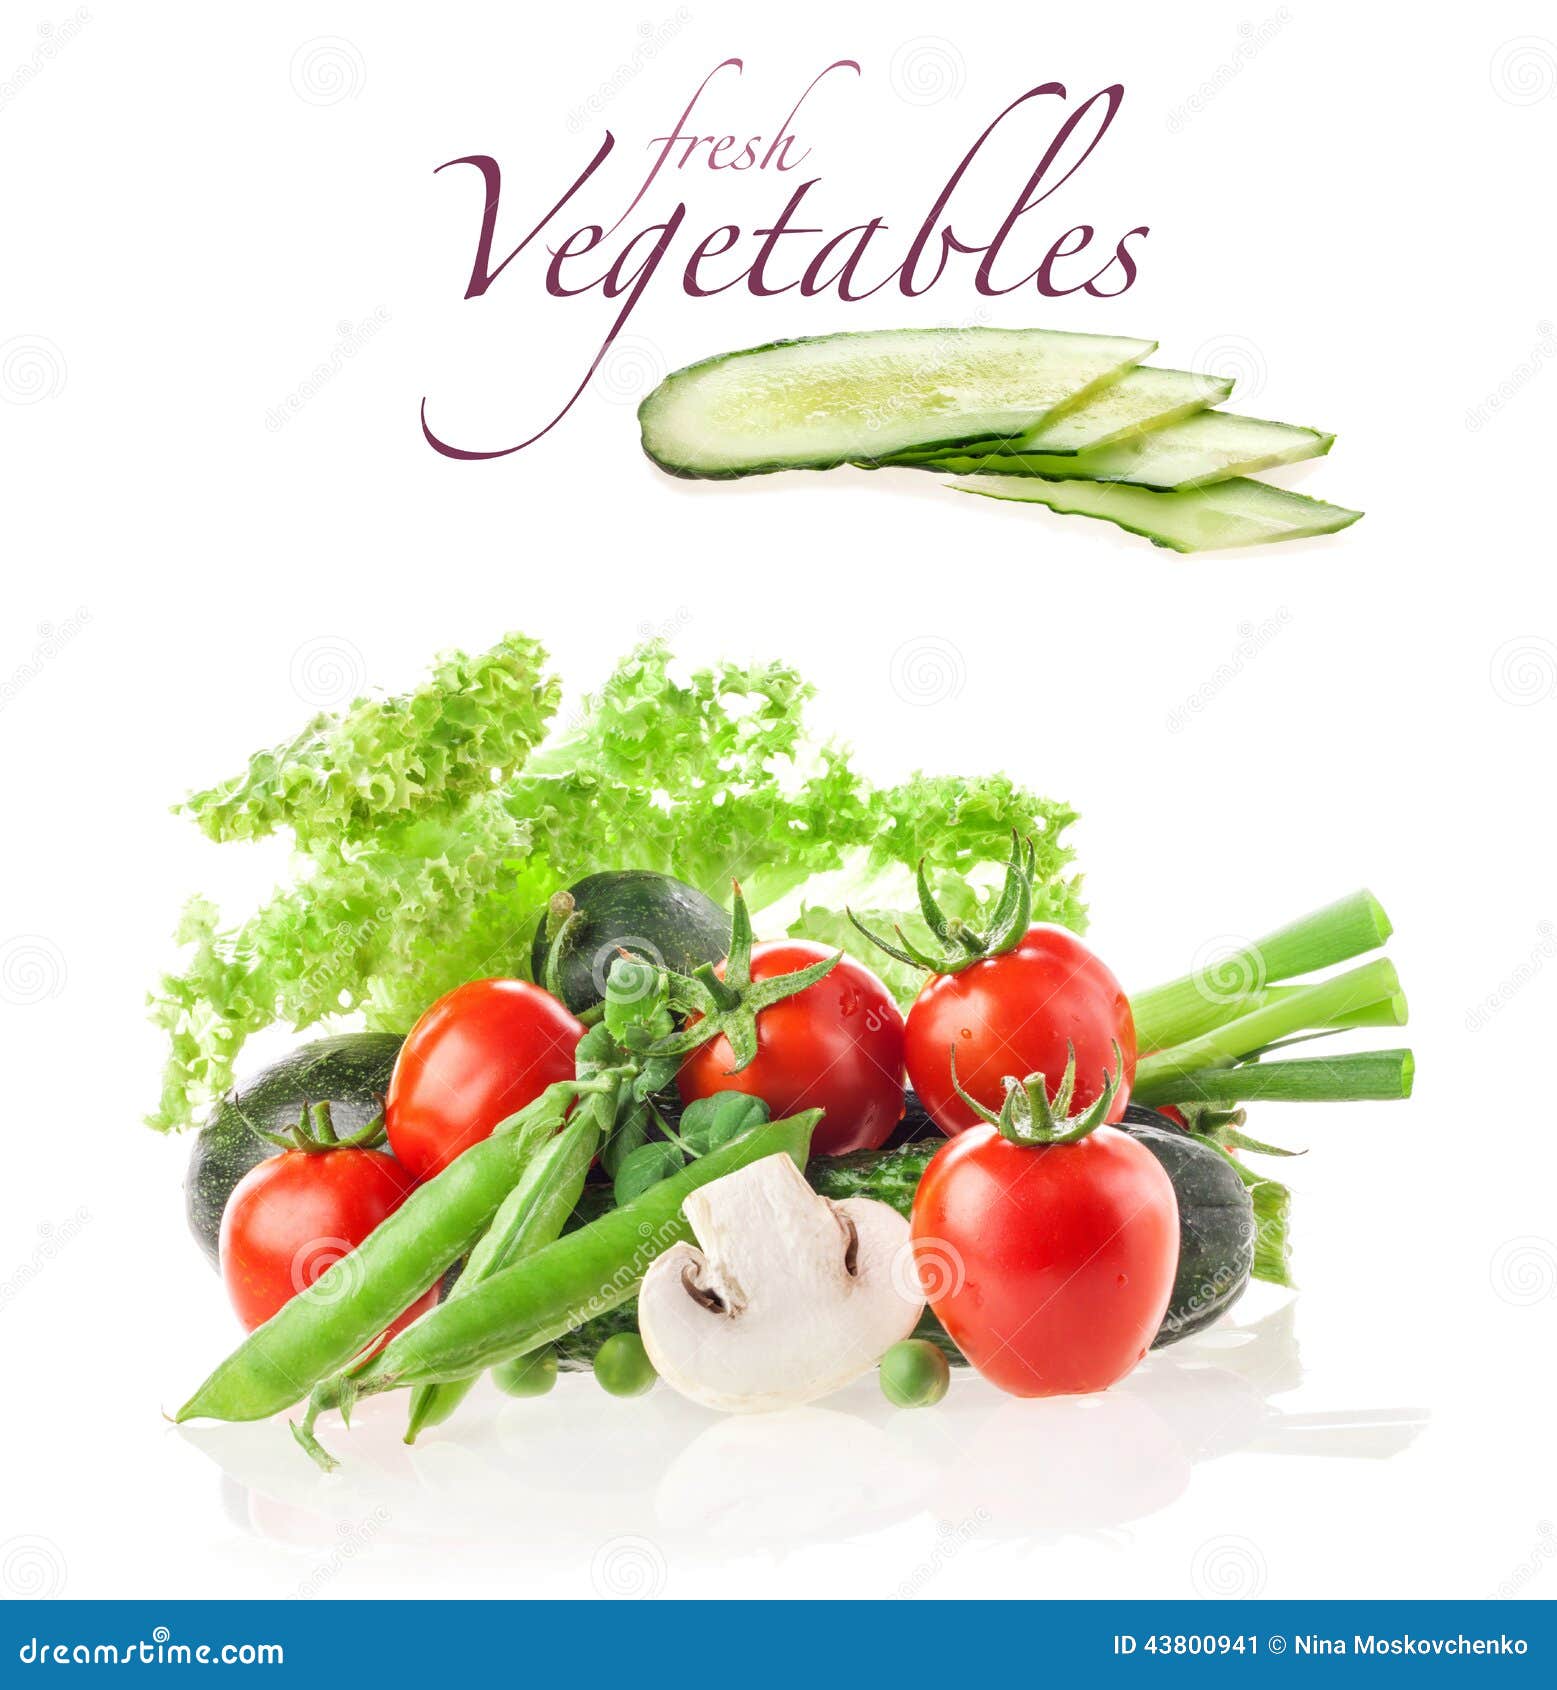 Different fresh vegetables stock image. Image of food - 43800941